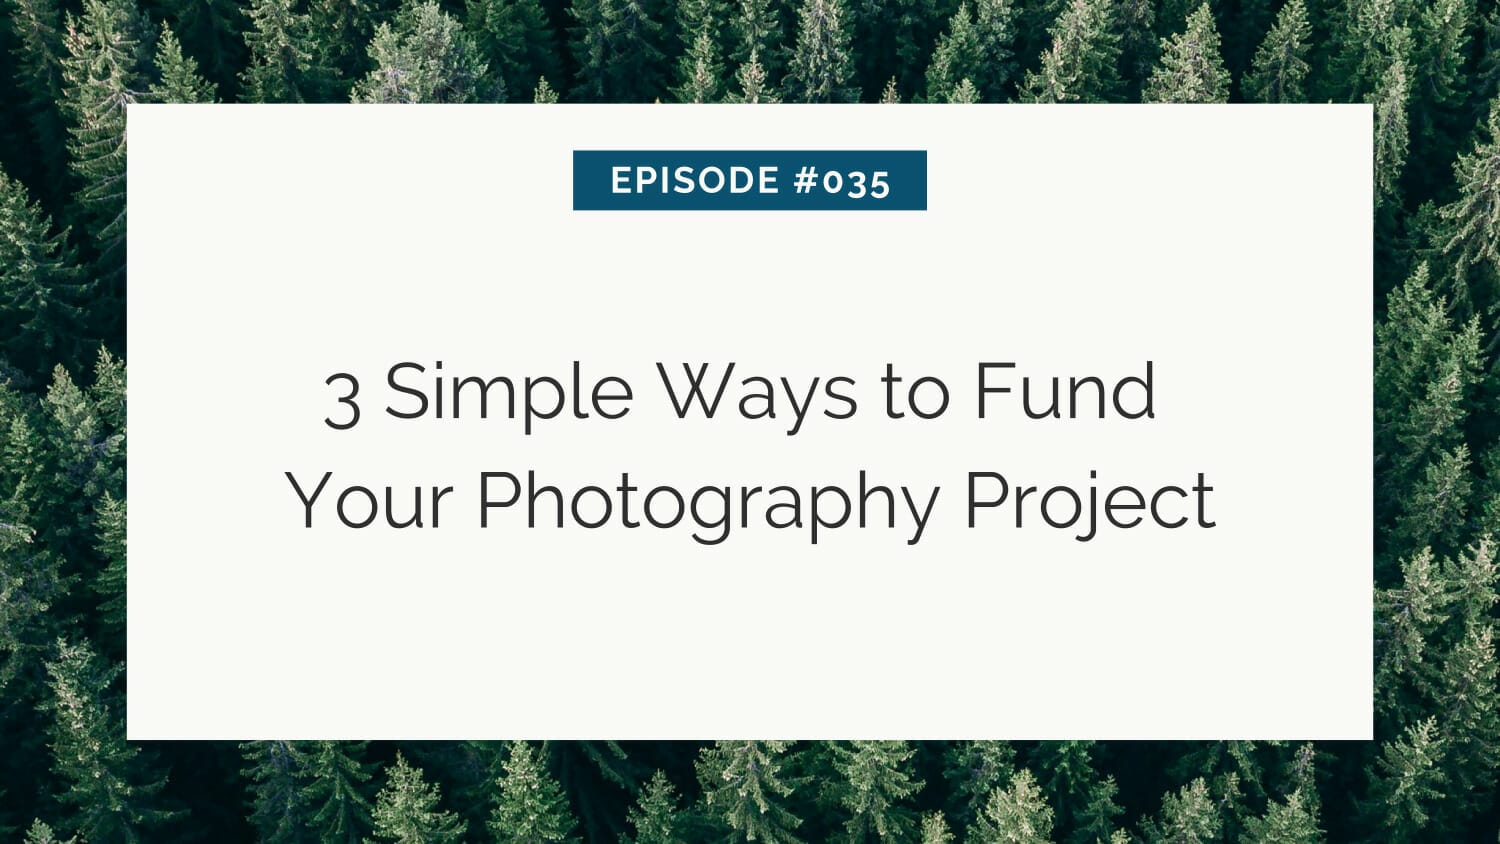 Podcast episode graphic featuring tips for financing photography projects, set against a forest backdrop.